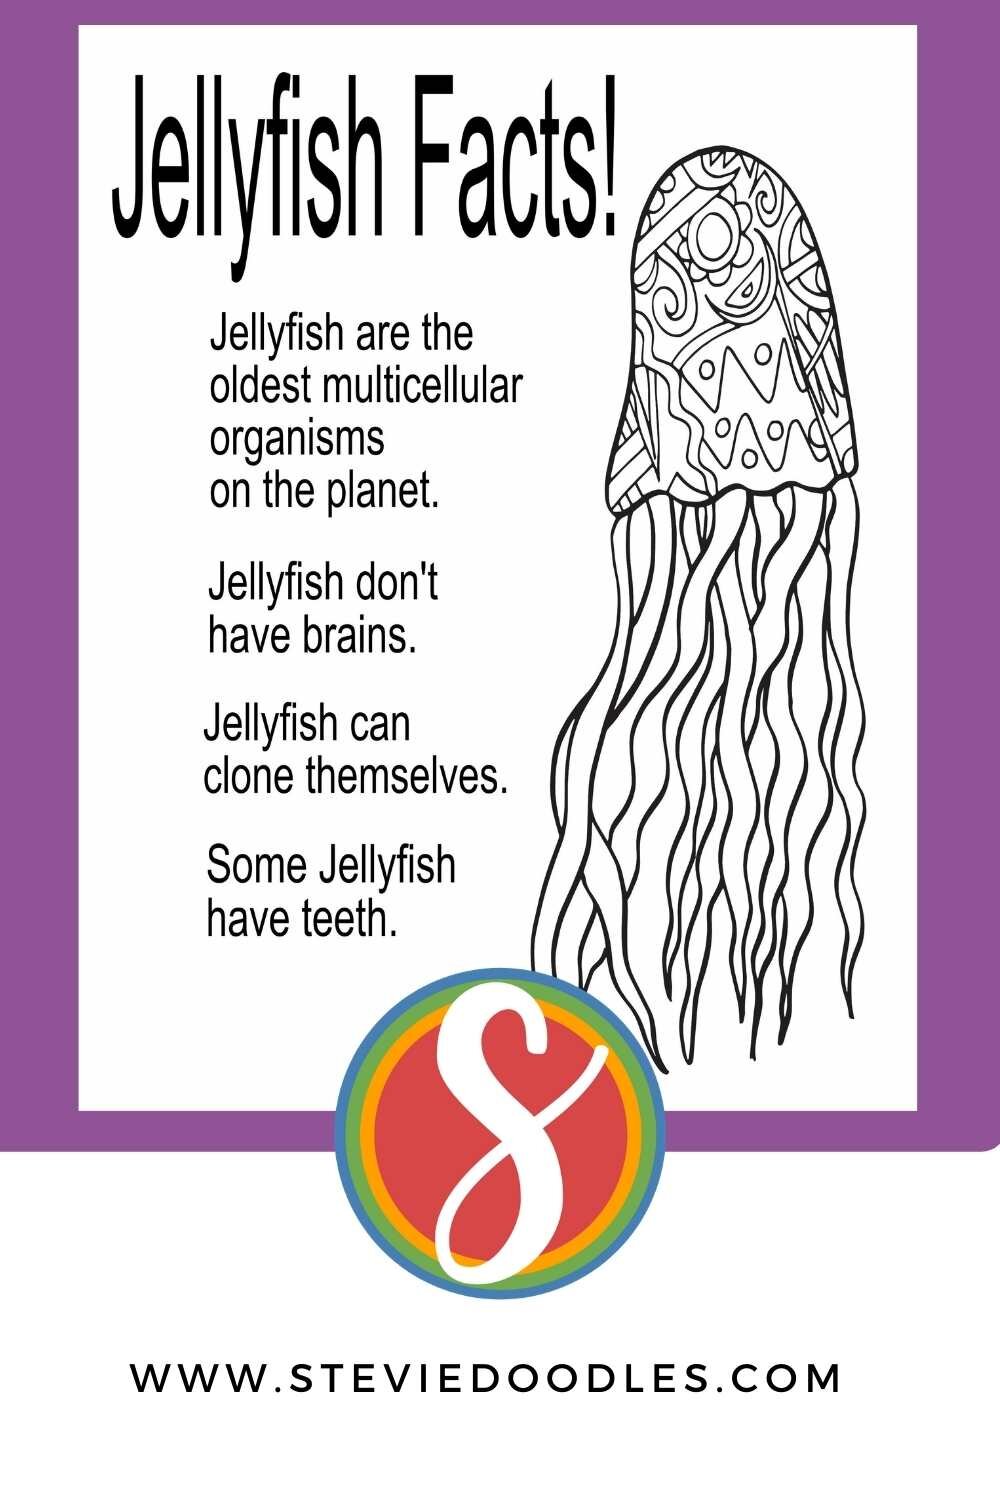 A Free Jellyfish Coloring Page With Jellyfish Facts - Free Printable From Stevie Doodles